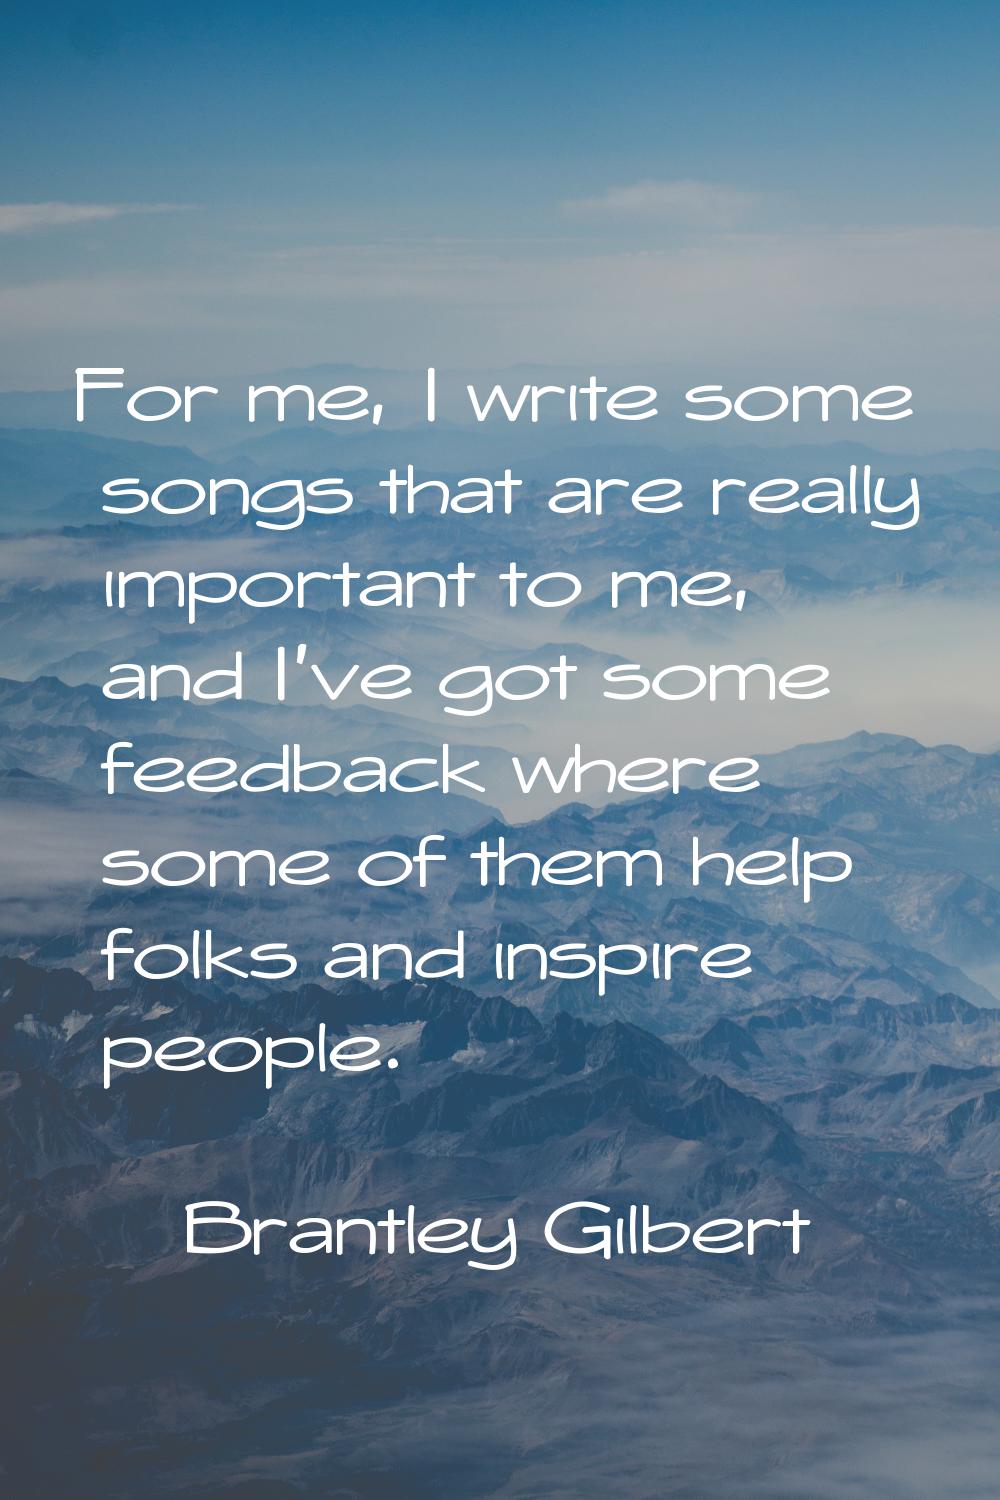 For me, I write some songs that are really important to me, and I've got some feedback where some o